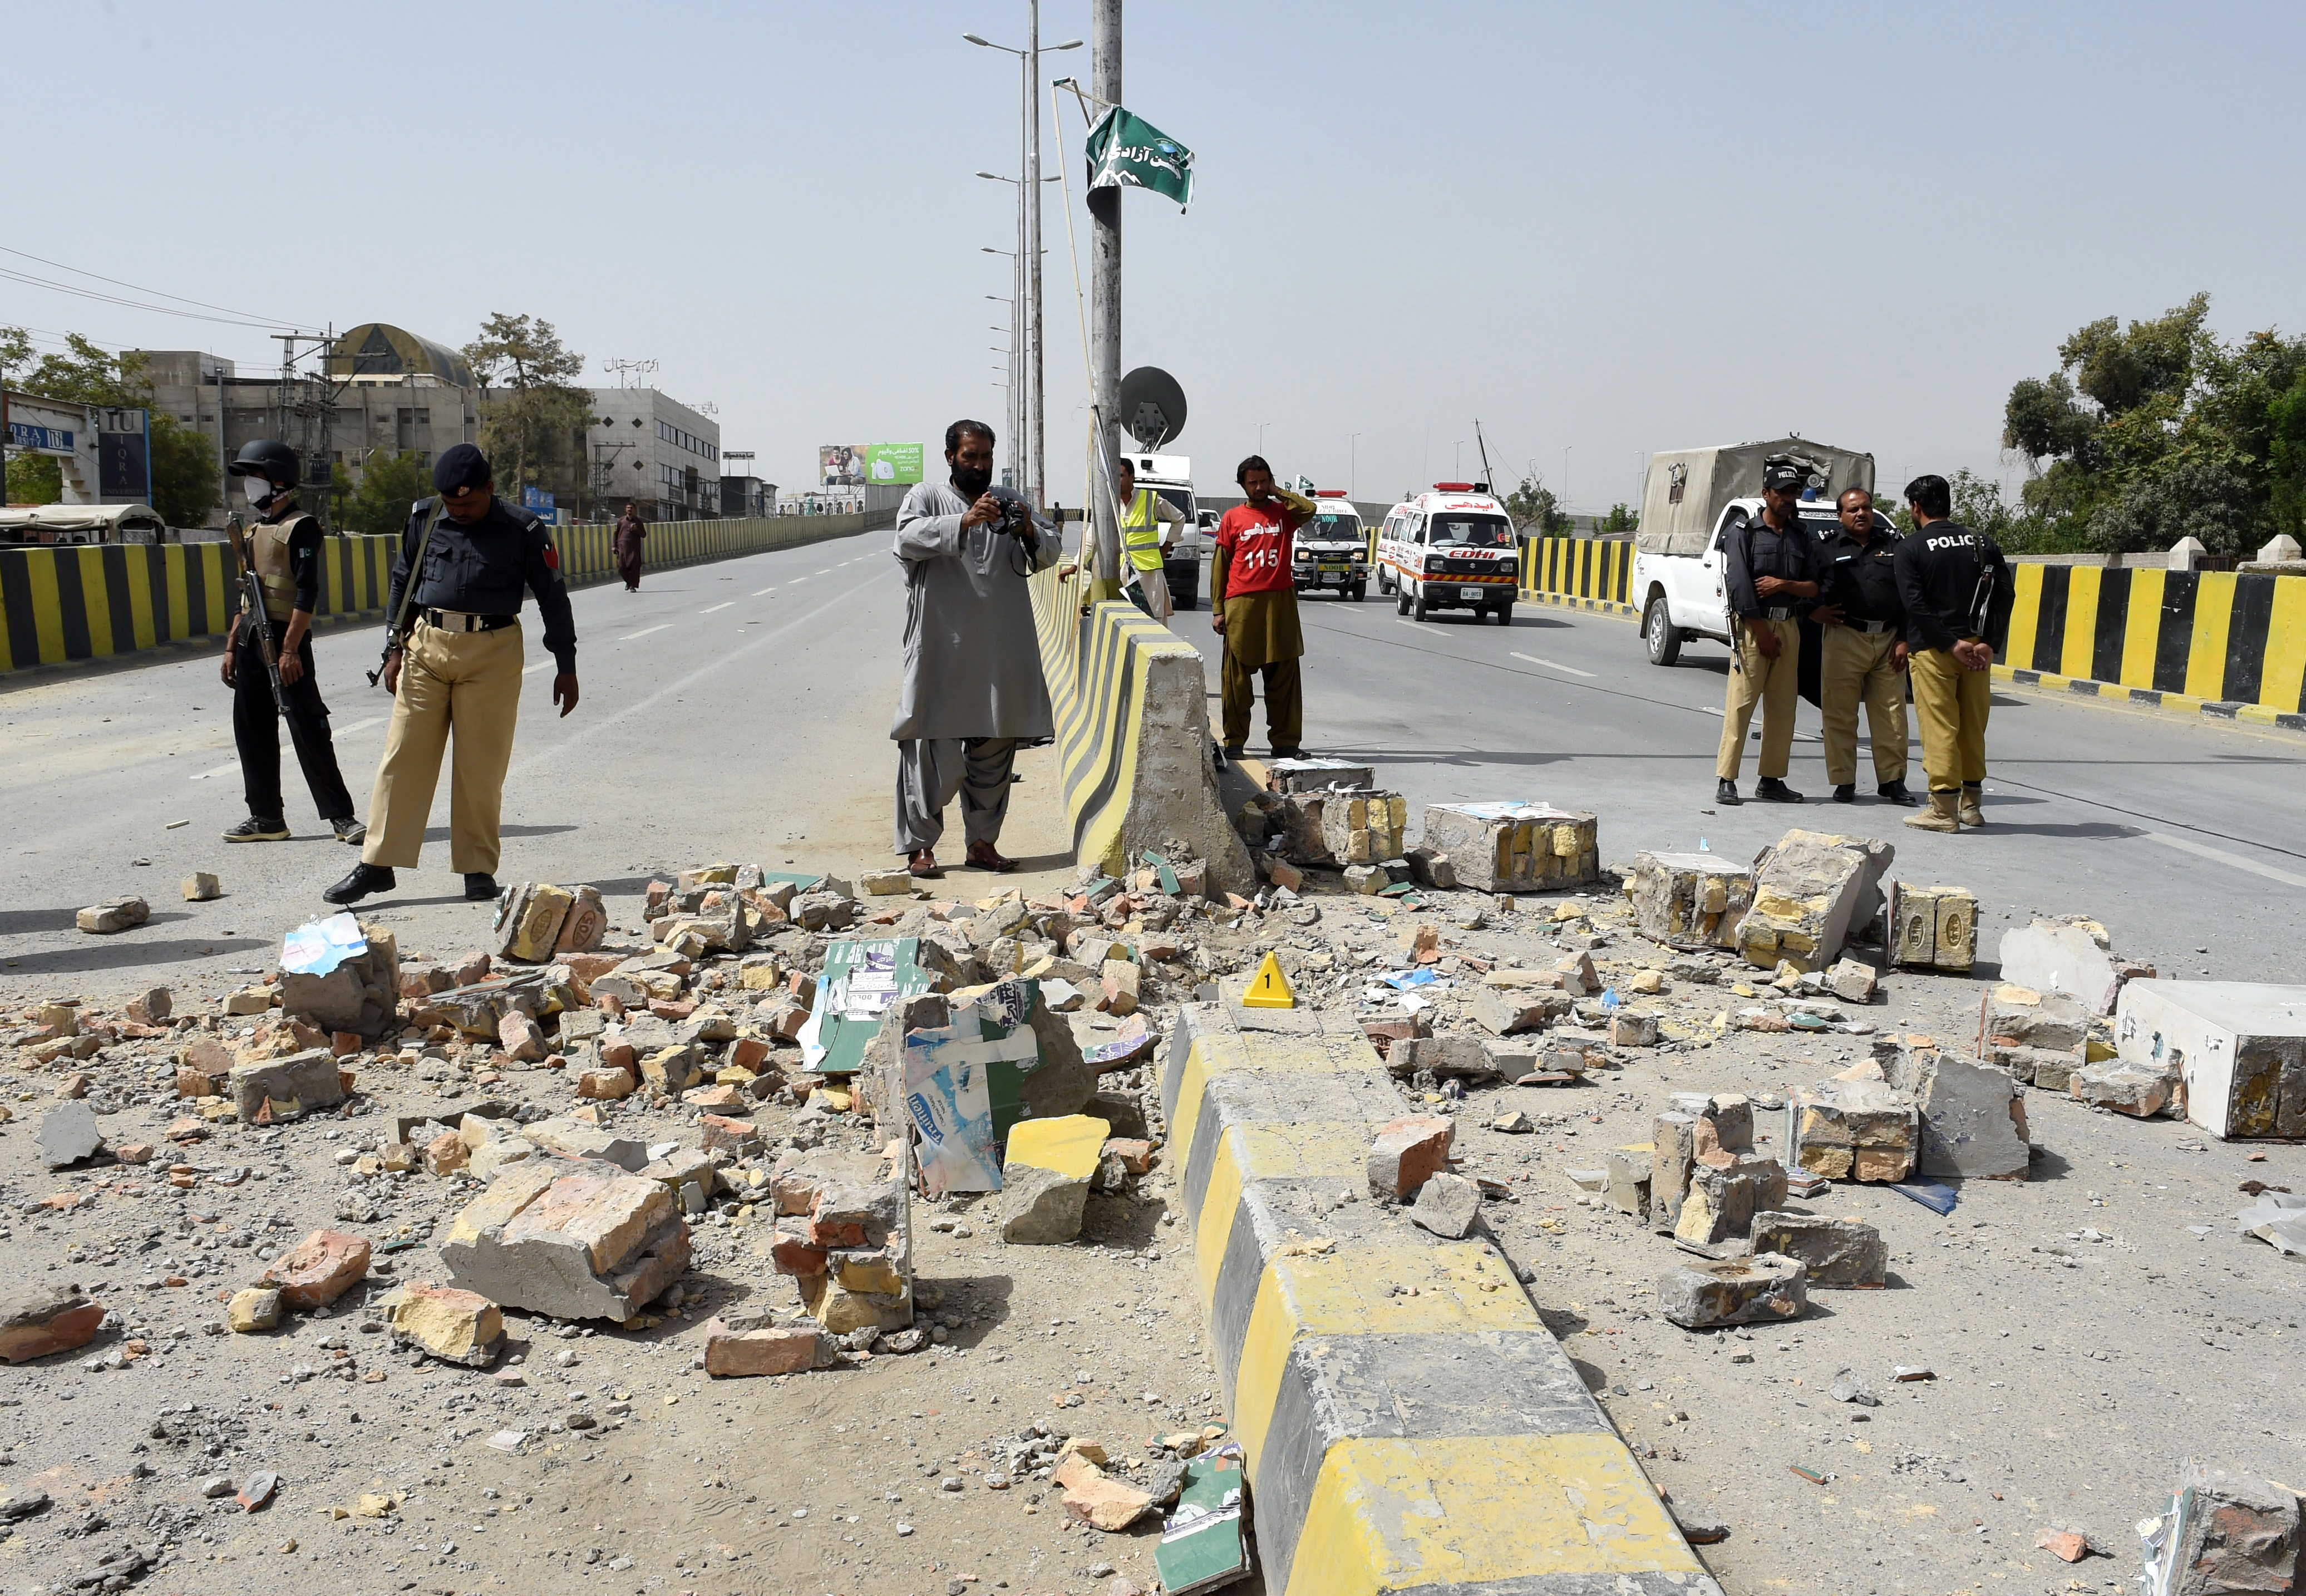 Pakistani security officials inspect the site of a roadside bomb blast in Quetta on August 11, 2016.  A roadside bomb apparently targeting a judge injured at least 13 people in Pakistan's southwestern city of Quetta on August 11, officials said, days after a major attack killed most of the city's senior lawyers. / AFP PHOTO / BANARAS KHAN